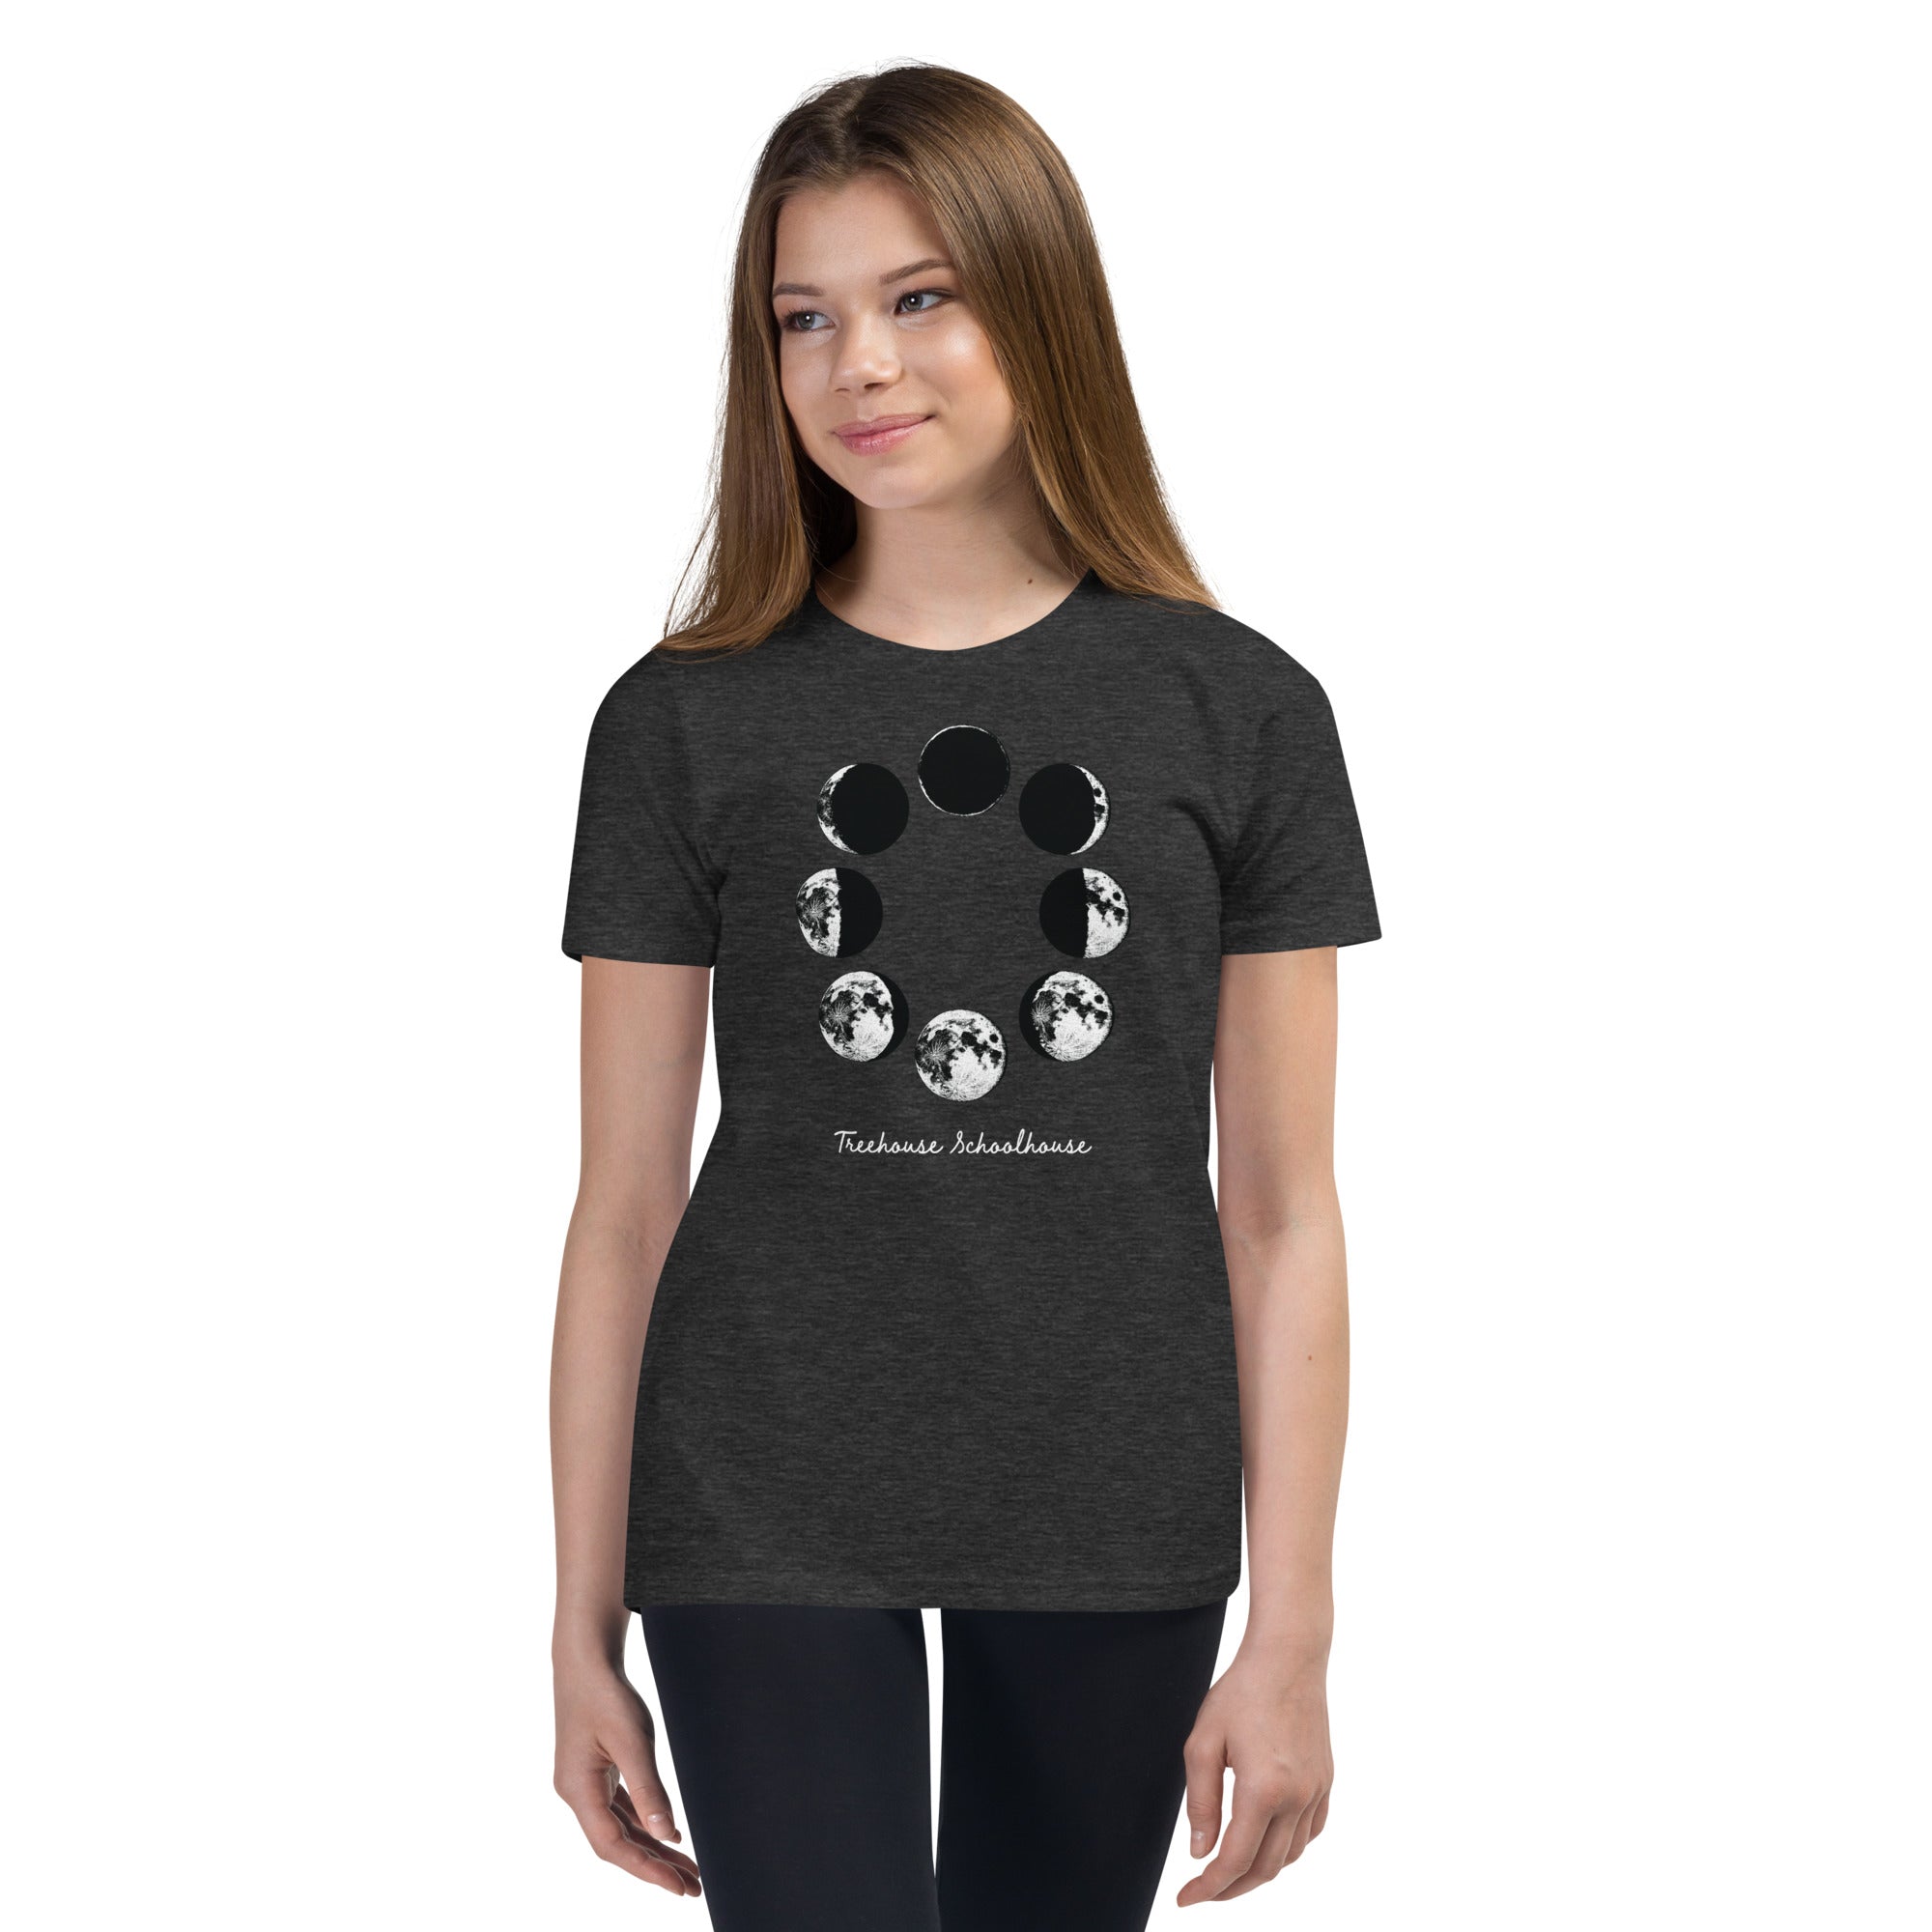 Youth Moon Phases T-Shirt